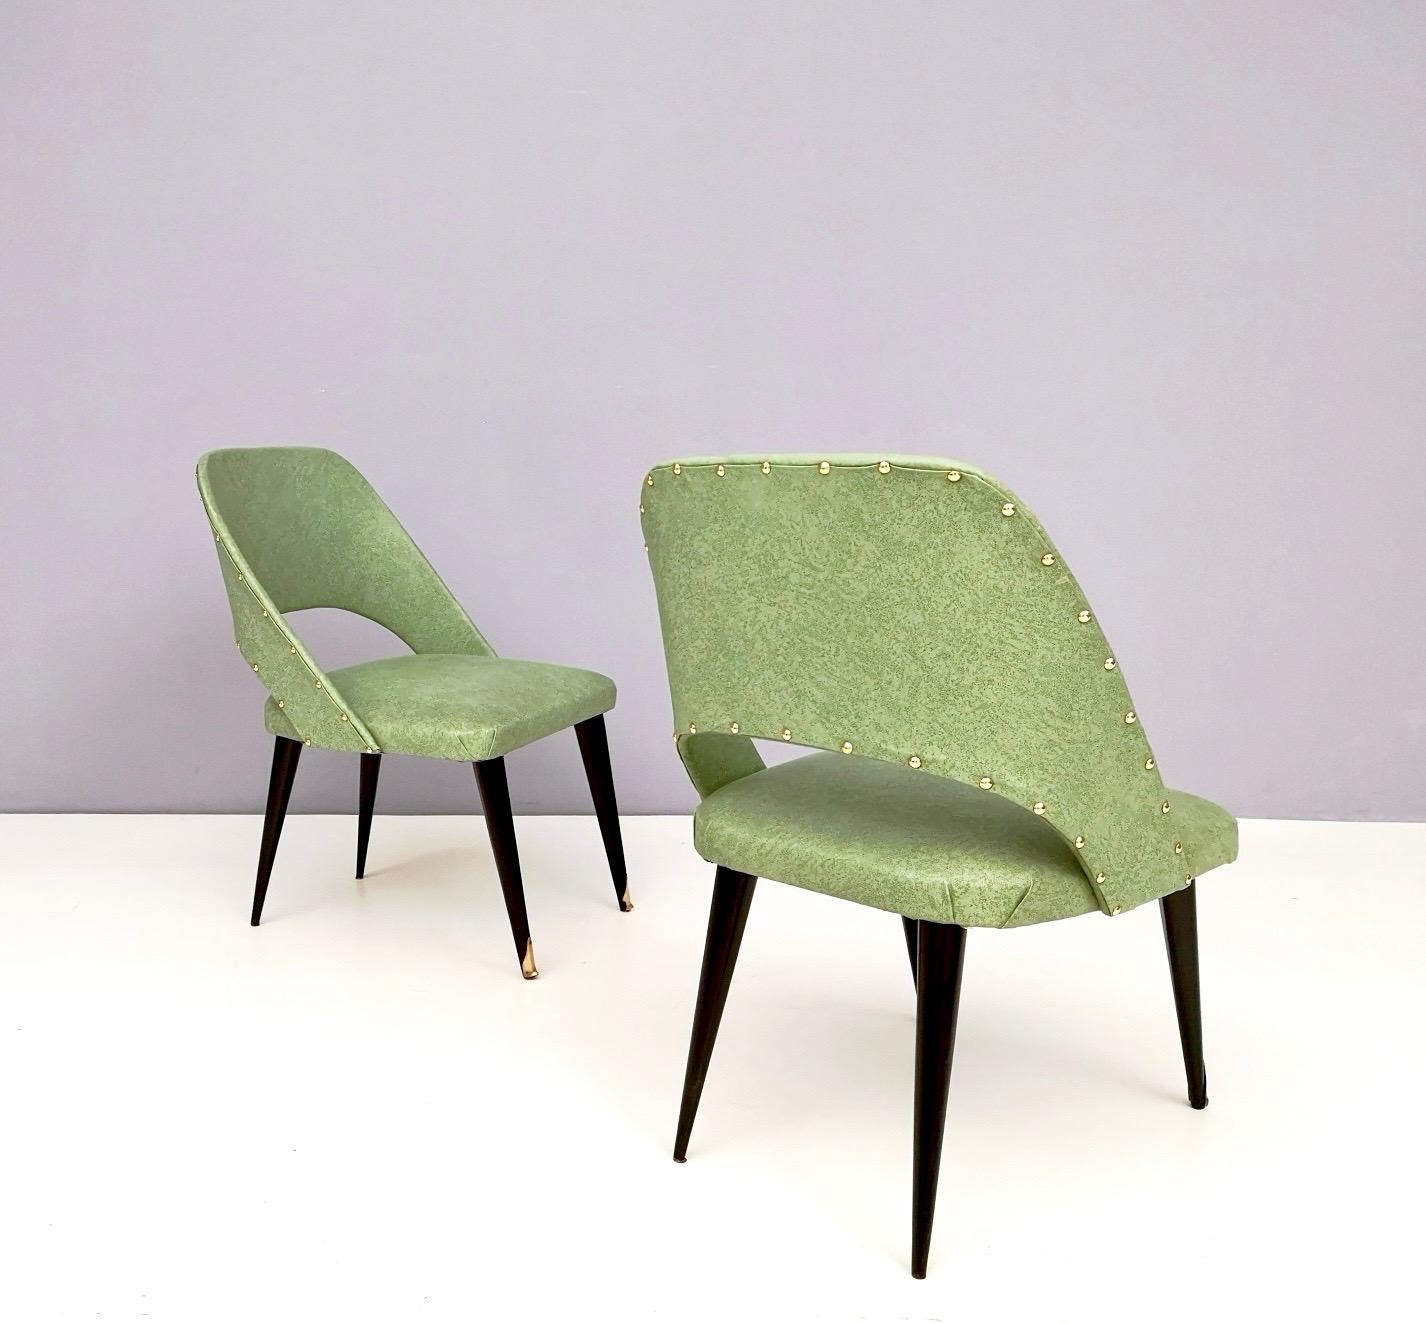 Mid-Century Modern Pair of Vintage Green Skai Side Chairs with Ebonized Wood Legs, Italy For Sale